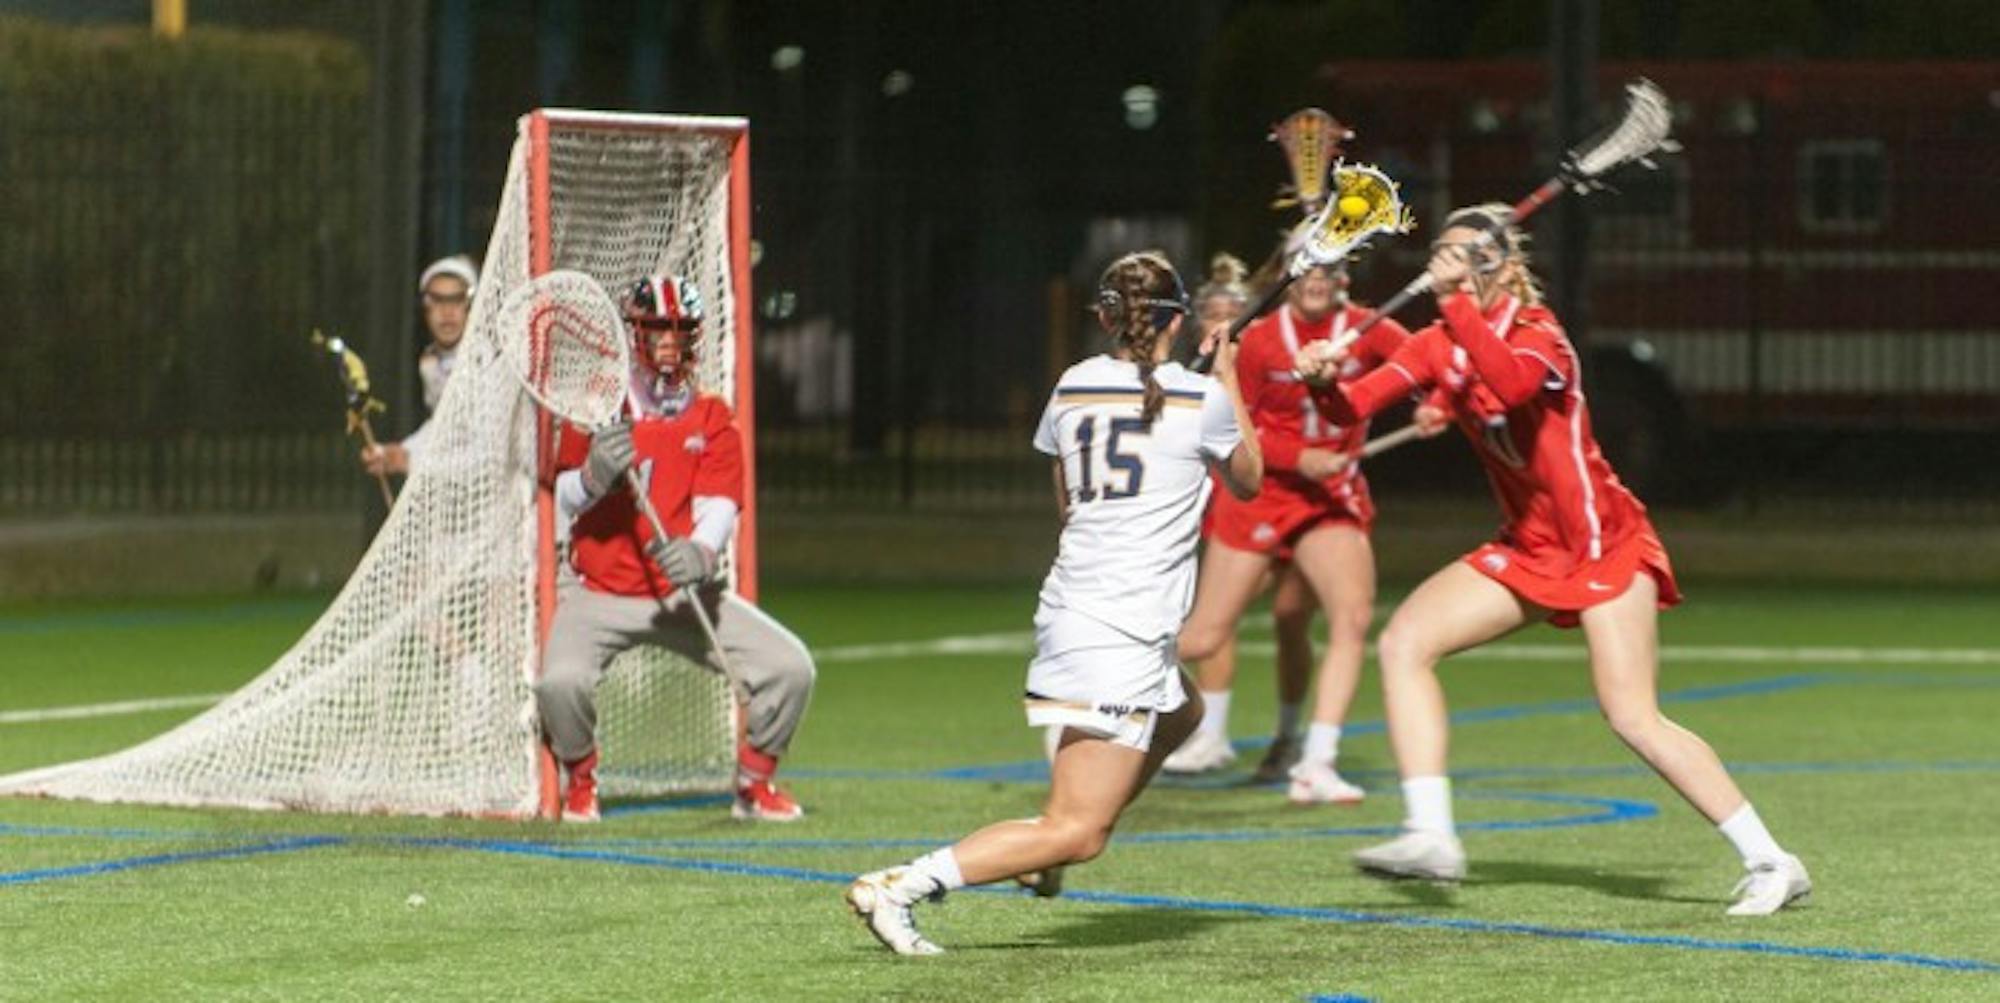 Irish senior attack Cortney Fortunato drives toward the goal during Notre Dame’s 16-13 win over Ohio State on March 7 at Arlotta Stadium. Fortunato scored three goals and had one assist during Notre Dame’s 13-9 Senior Day win over Virginia Tech on Saturday.